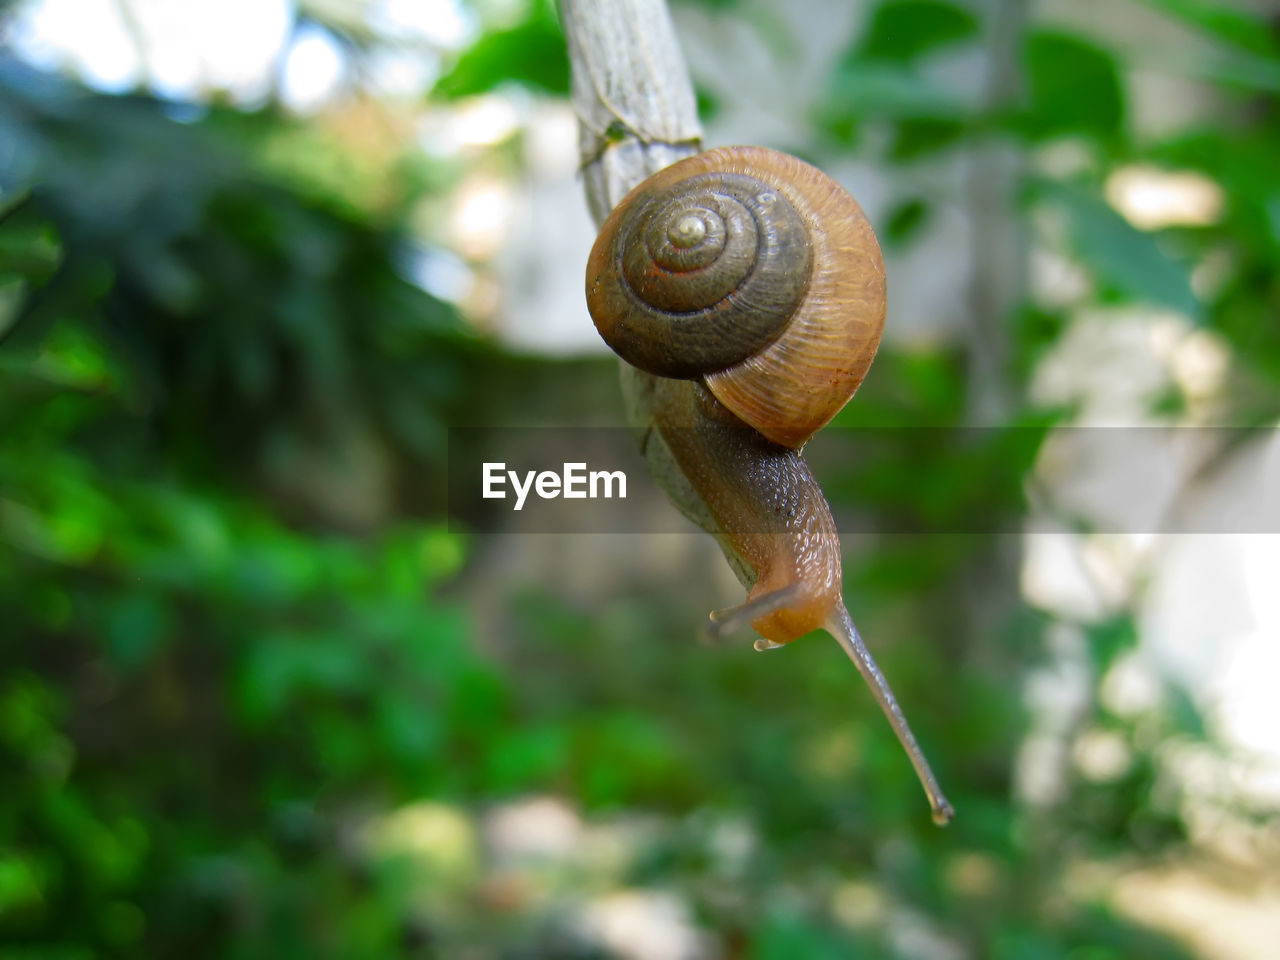 CLOSE-UP OF SNAIL ON A BLURRED BACKGROUND